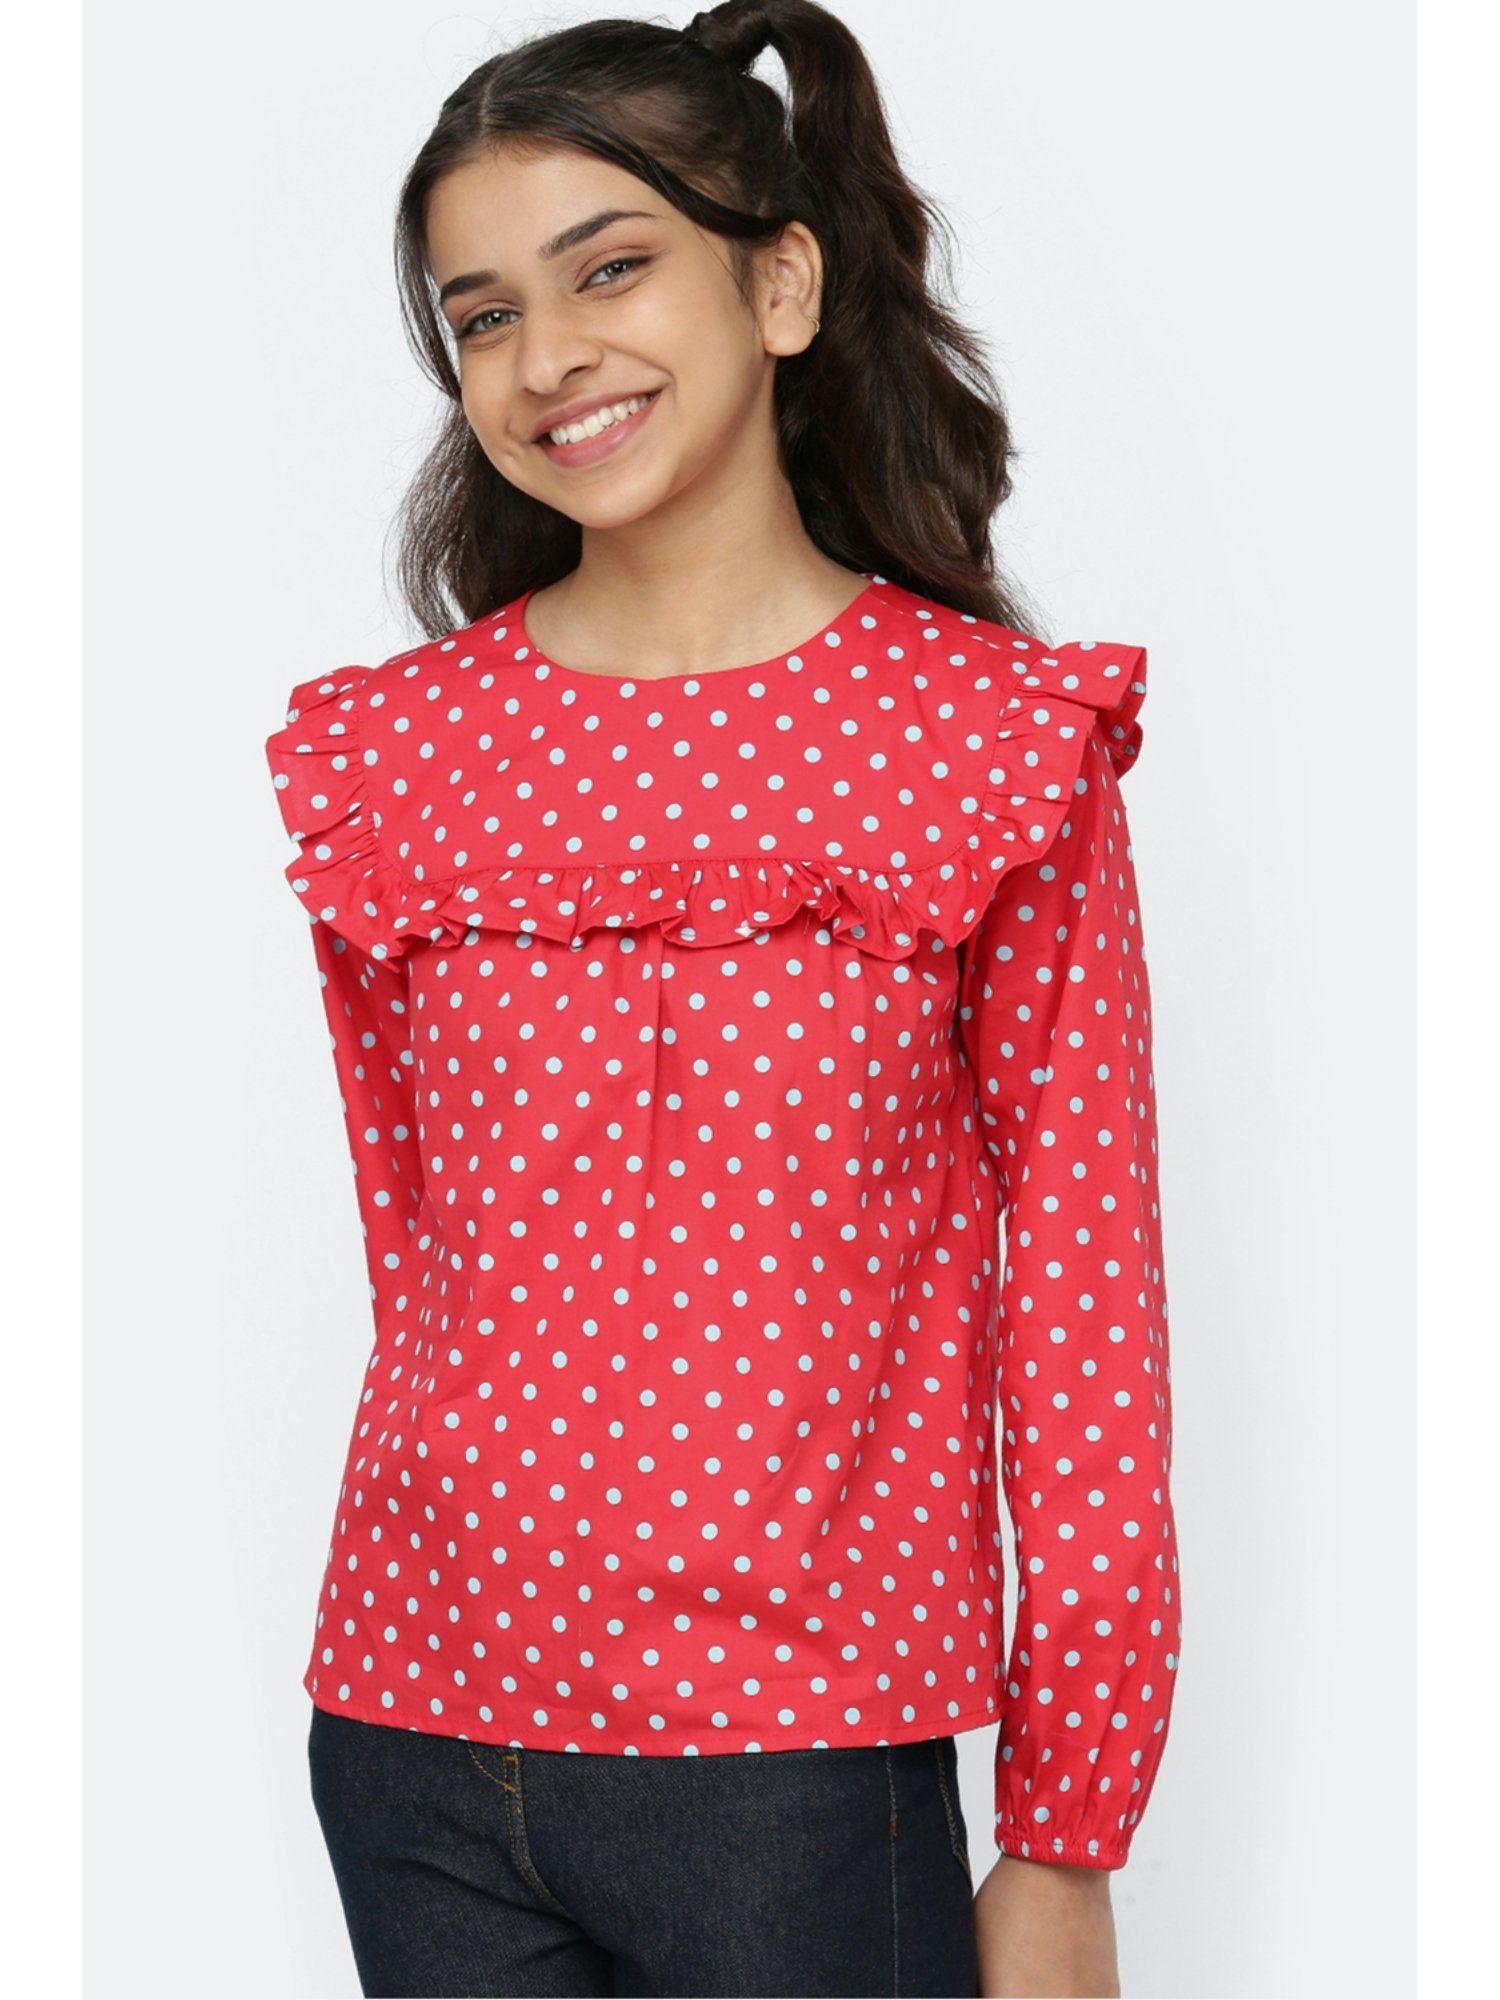 girls polka dots red top